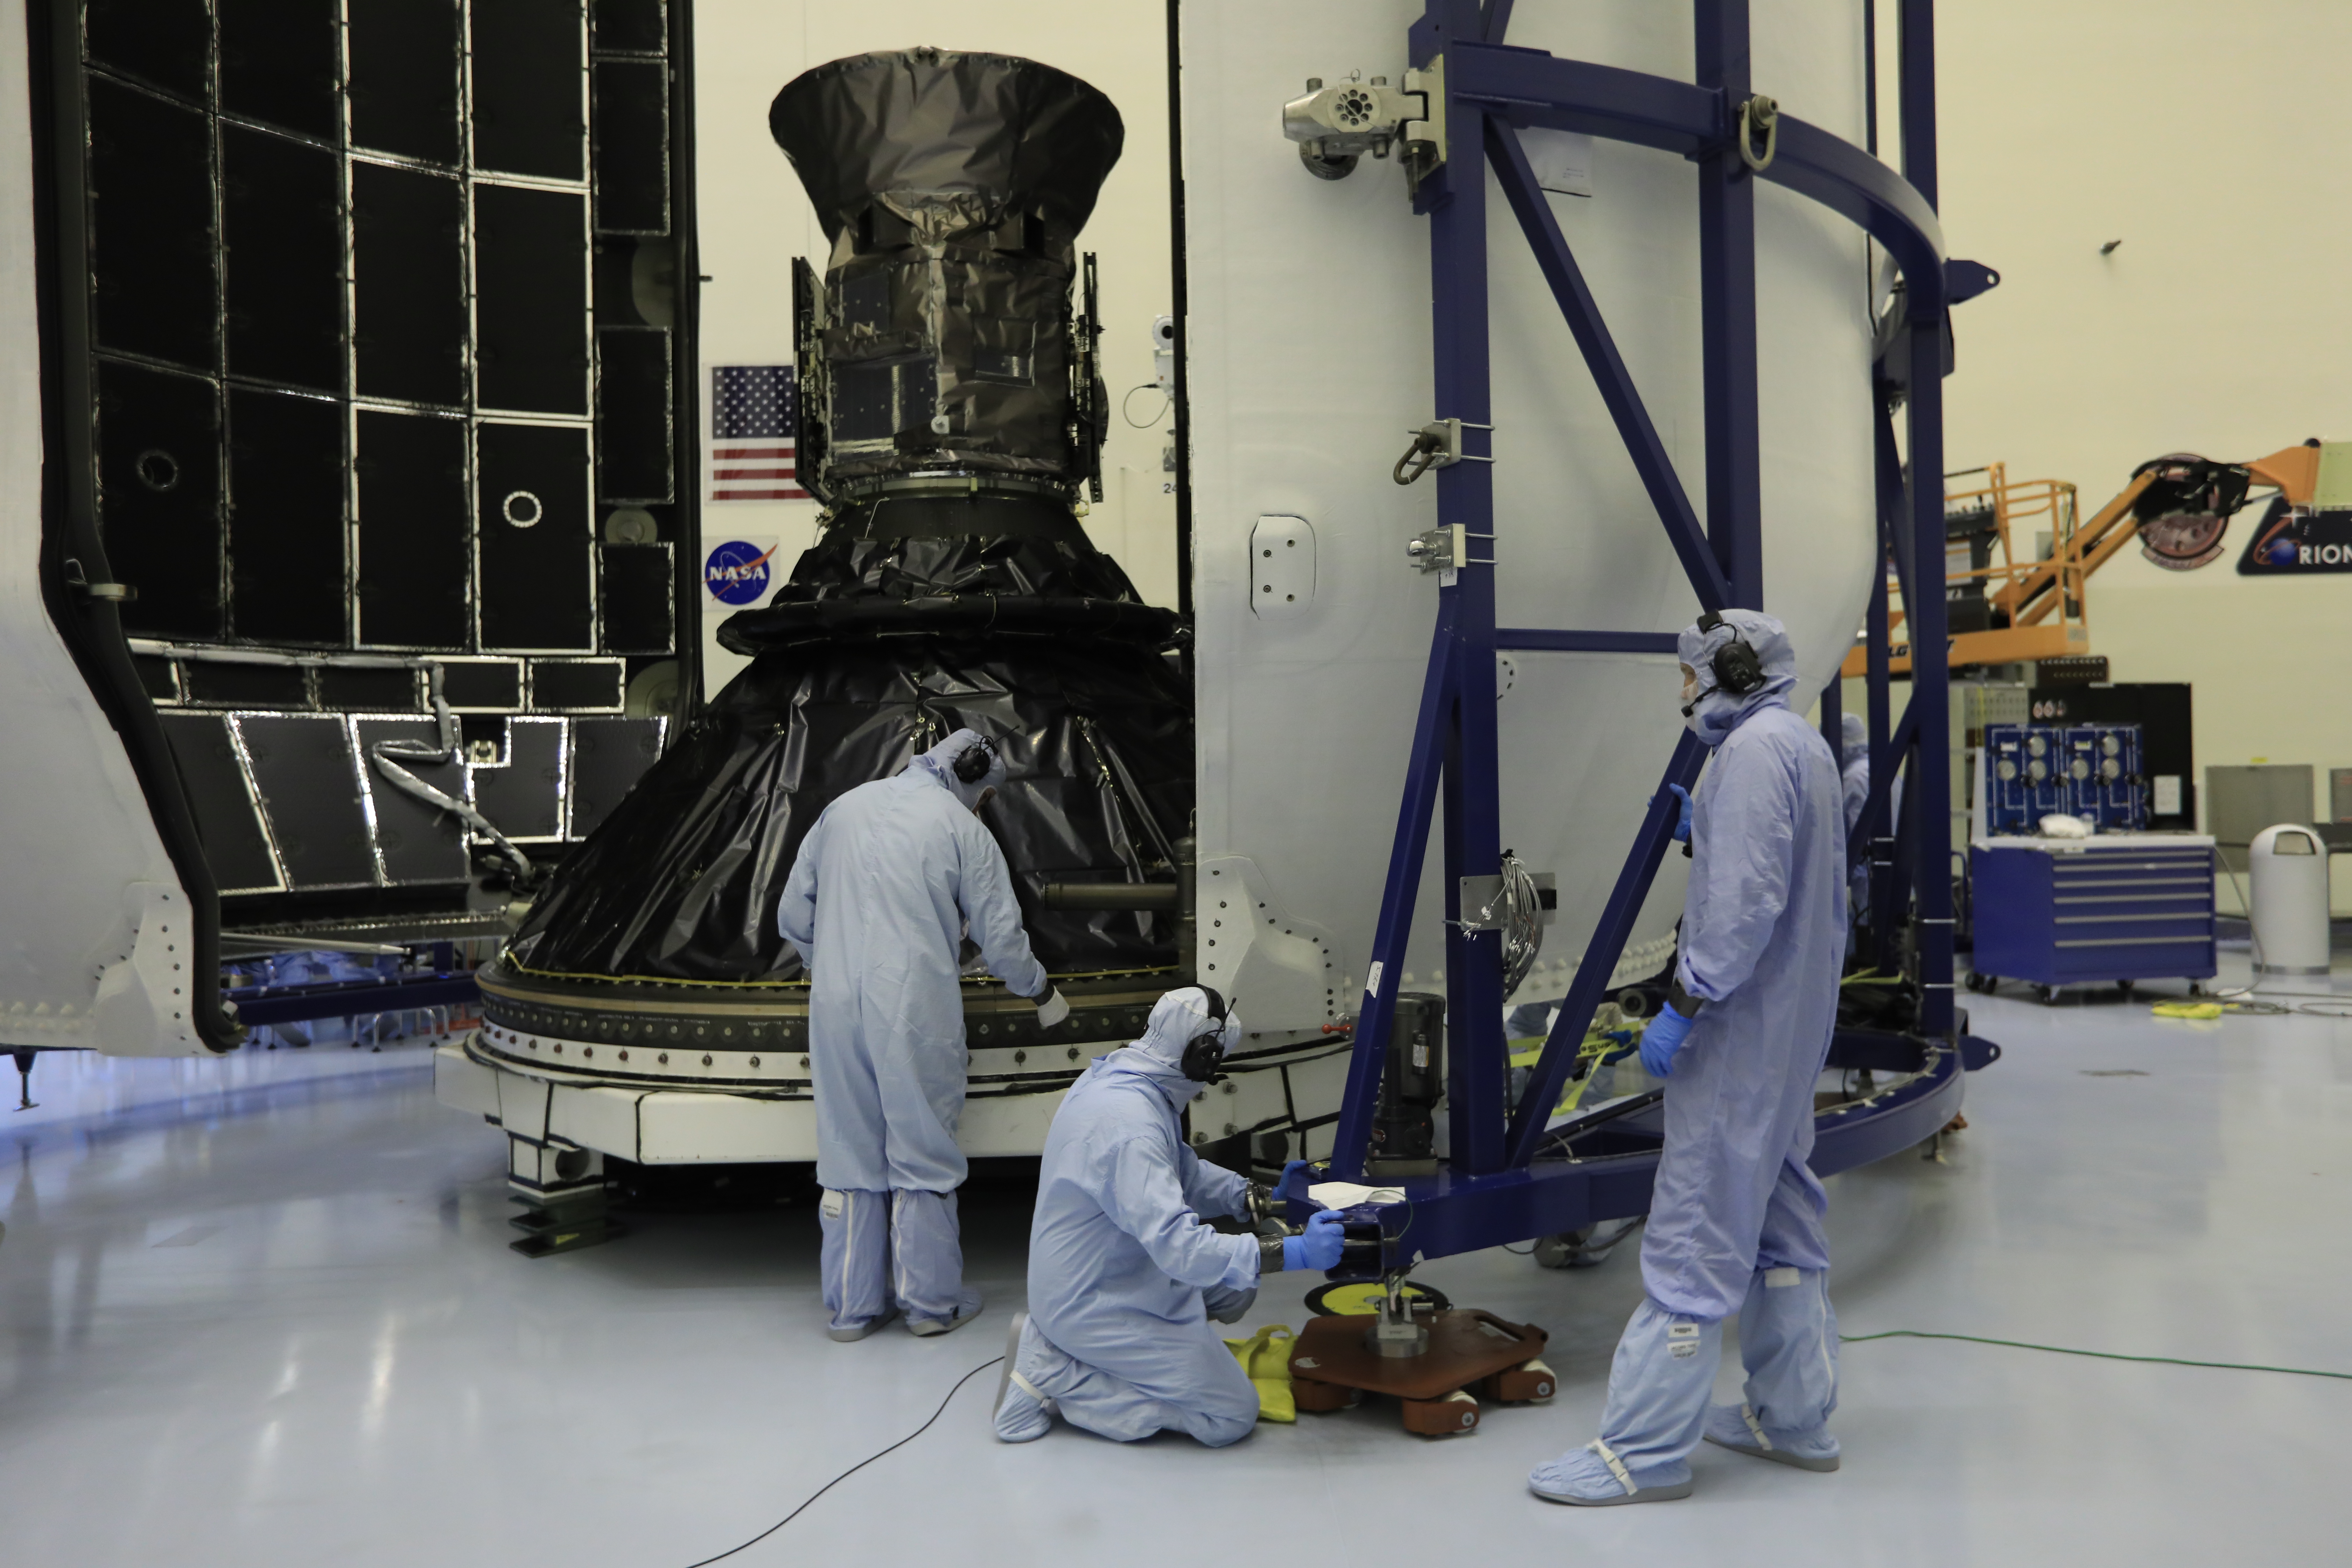 Technicians prepare NASA's Transiting Exoplanet Survey Satellite (TESS) for encapsulation in the SpaceX payload fairing inside the Payload Hazardous Servicing Facility at the agency's Kennedy Space Center in Florida.